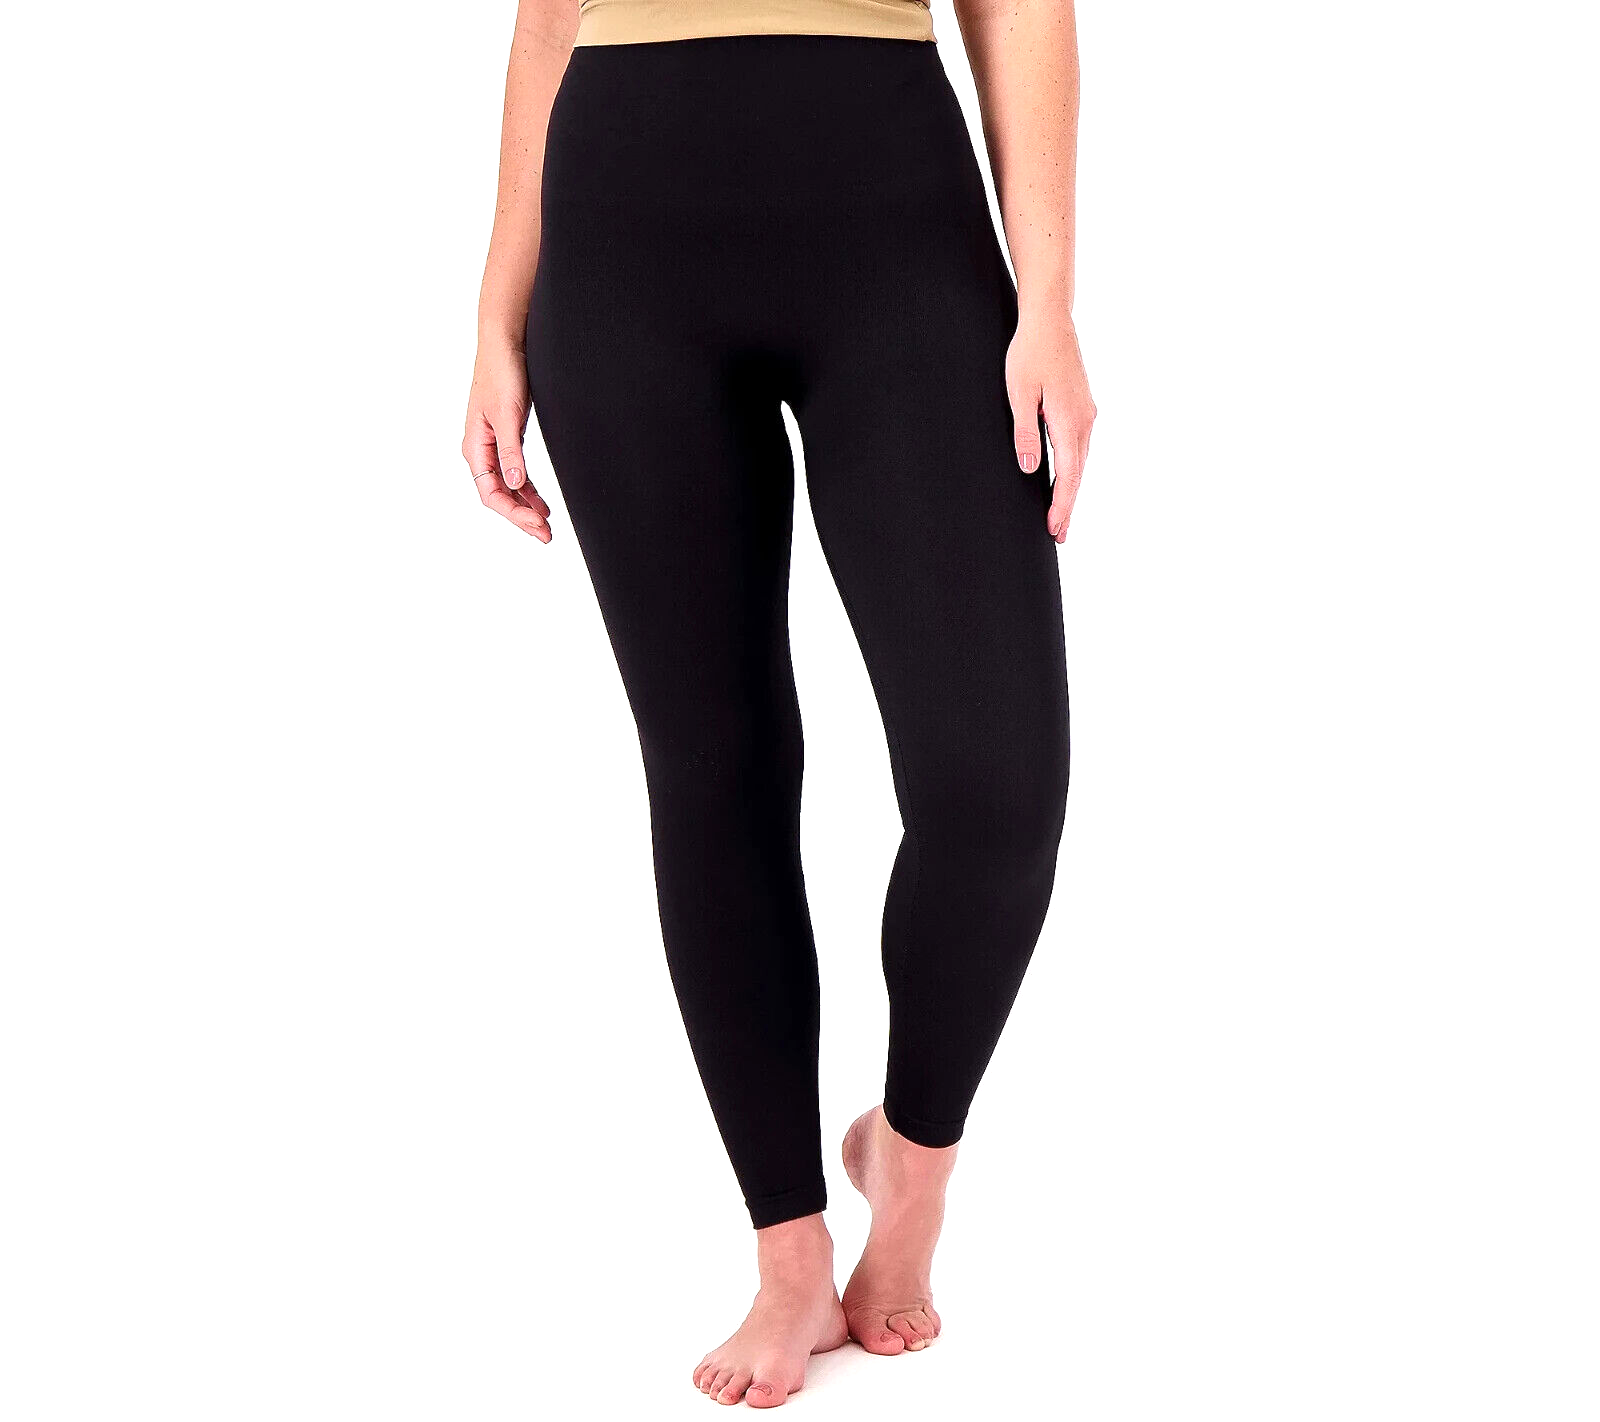 Primary image for Anti x Proof Seamless Compression Legging- BLACK, LARGE